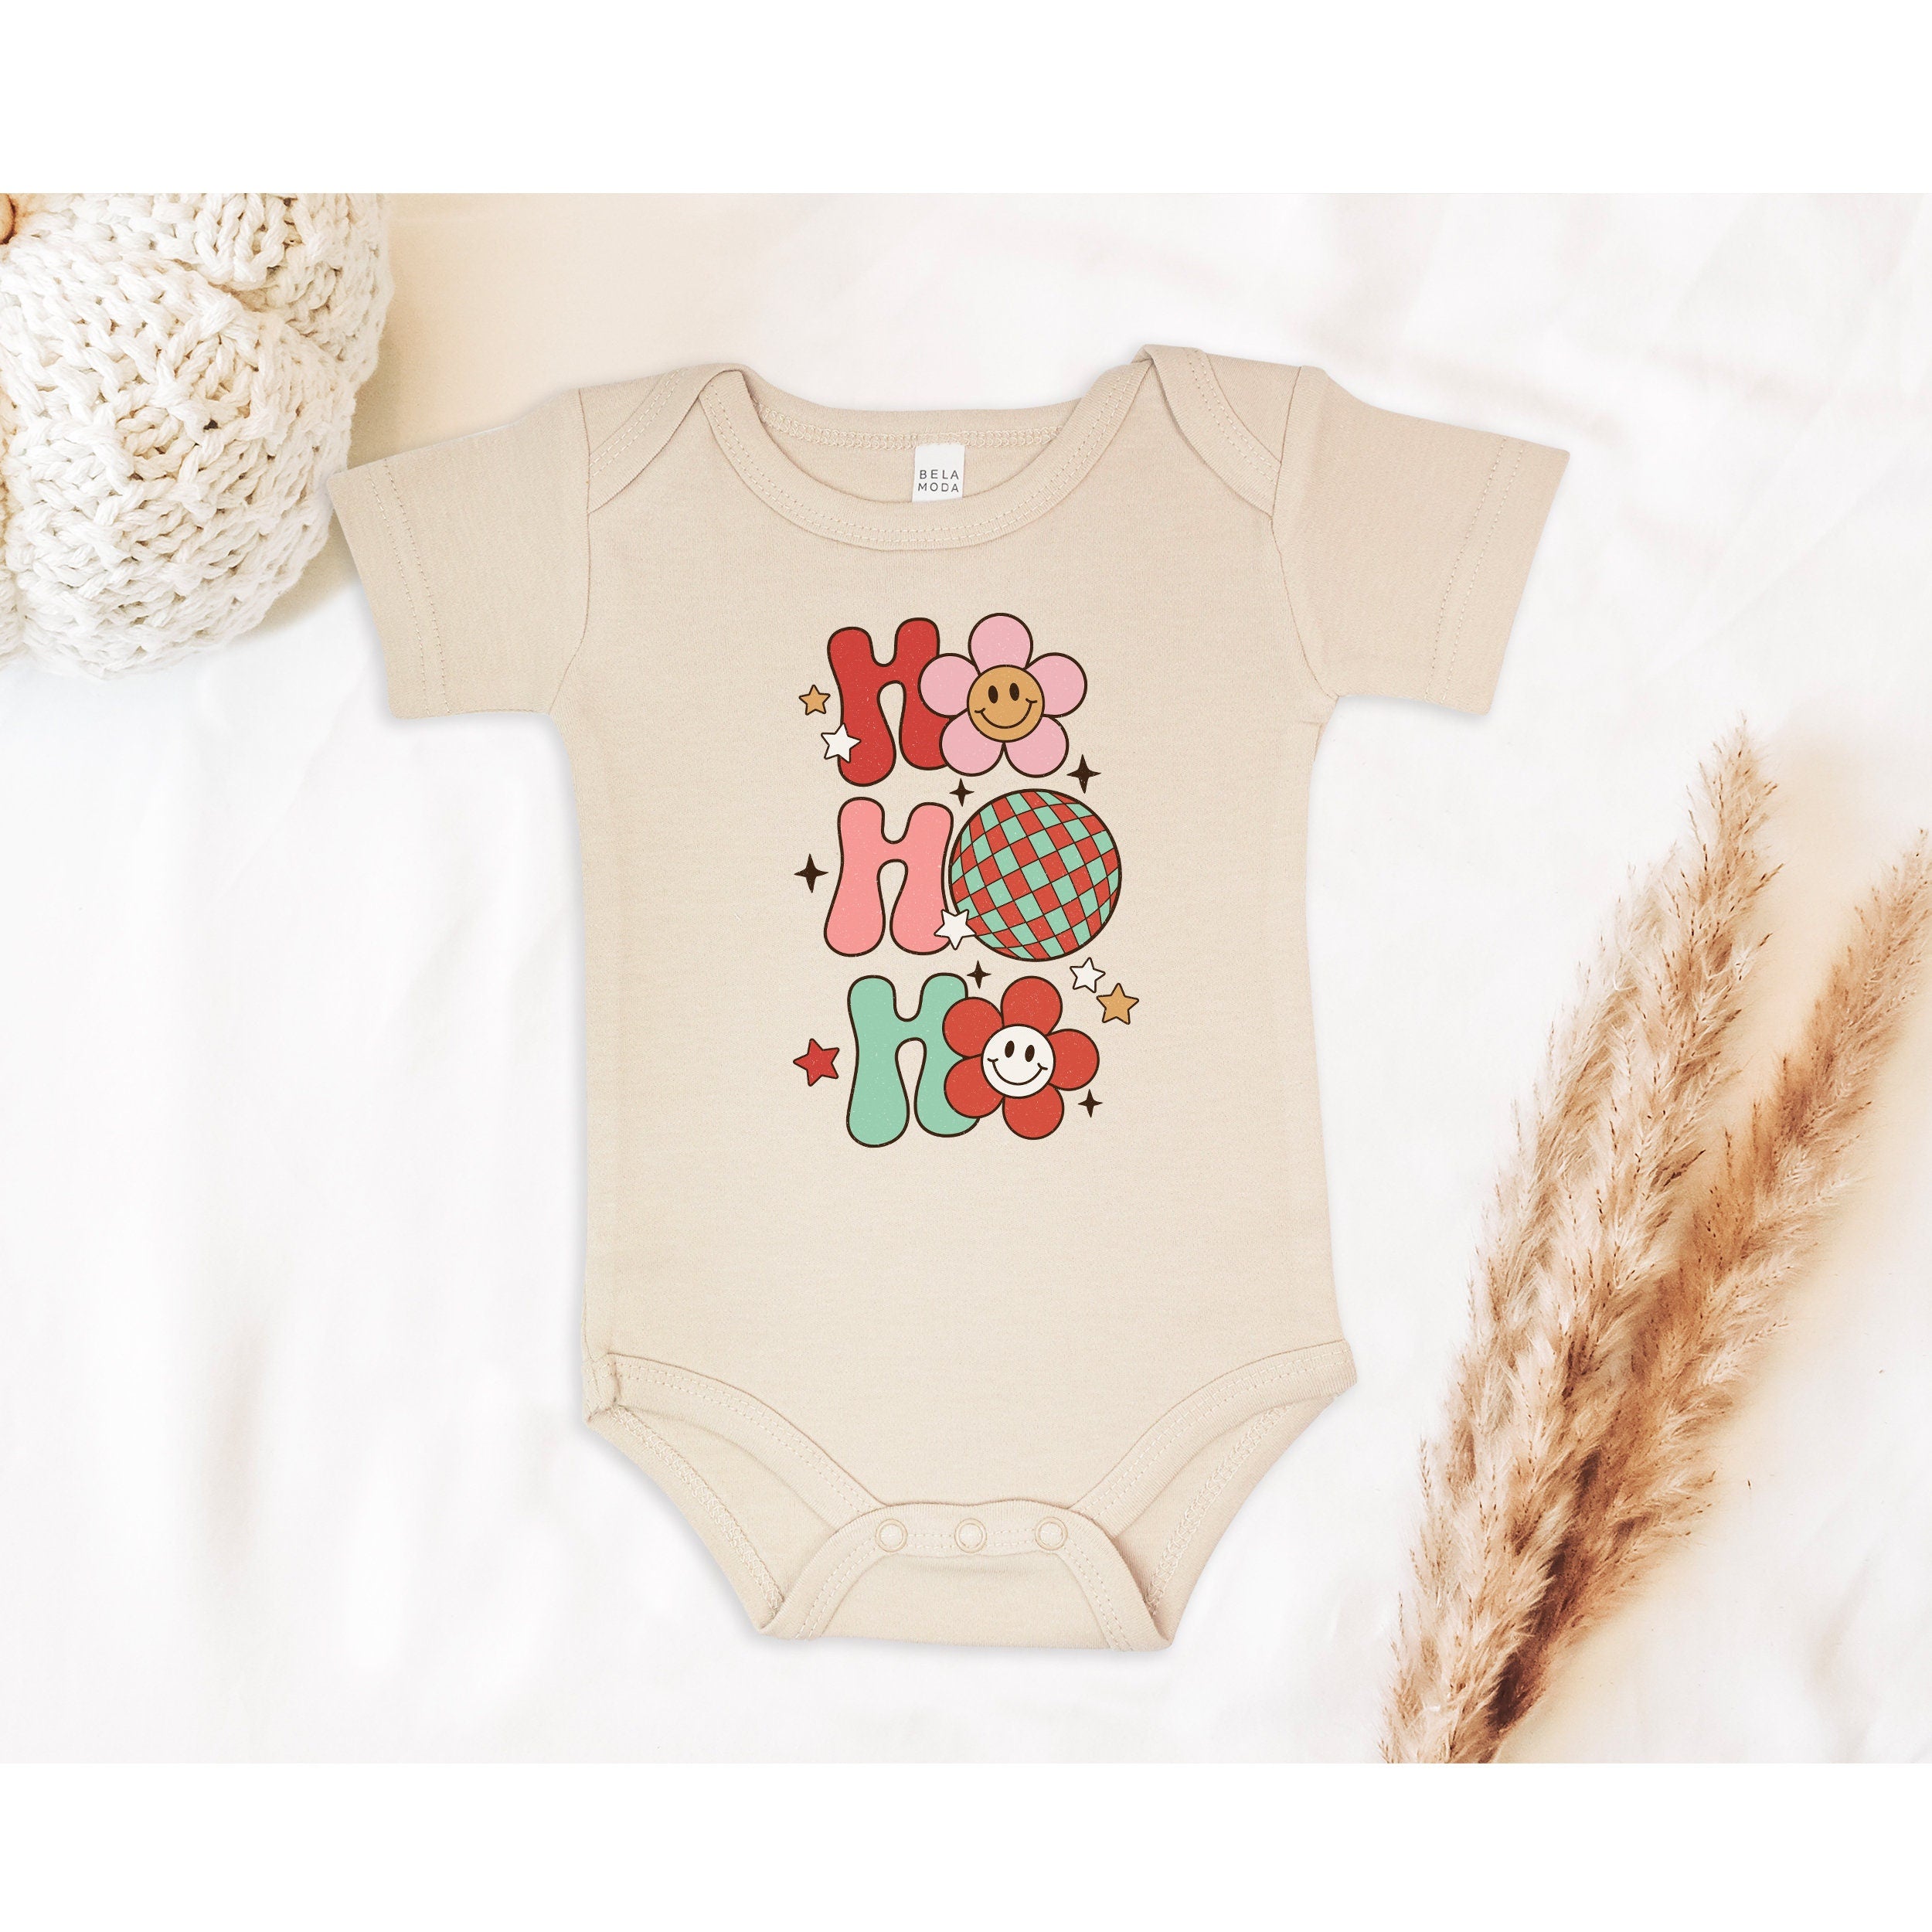 First Baby's Christmas, Baby Christmas Bodysuit, Christmas Baby Outfit, First Christmas Baby Outfit